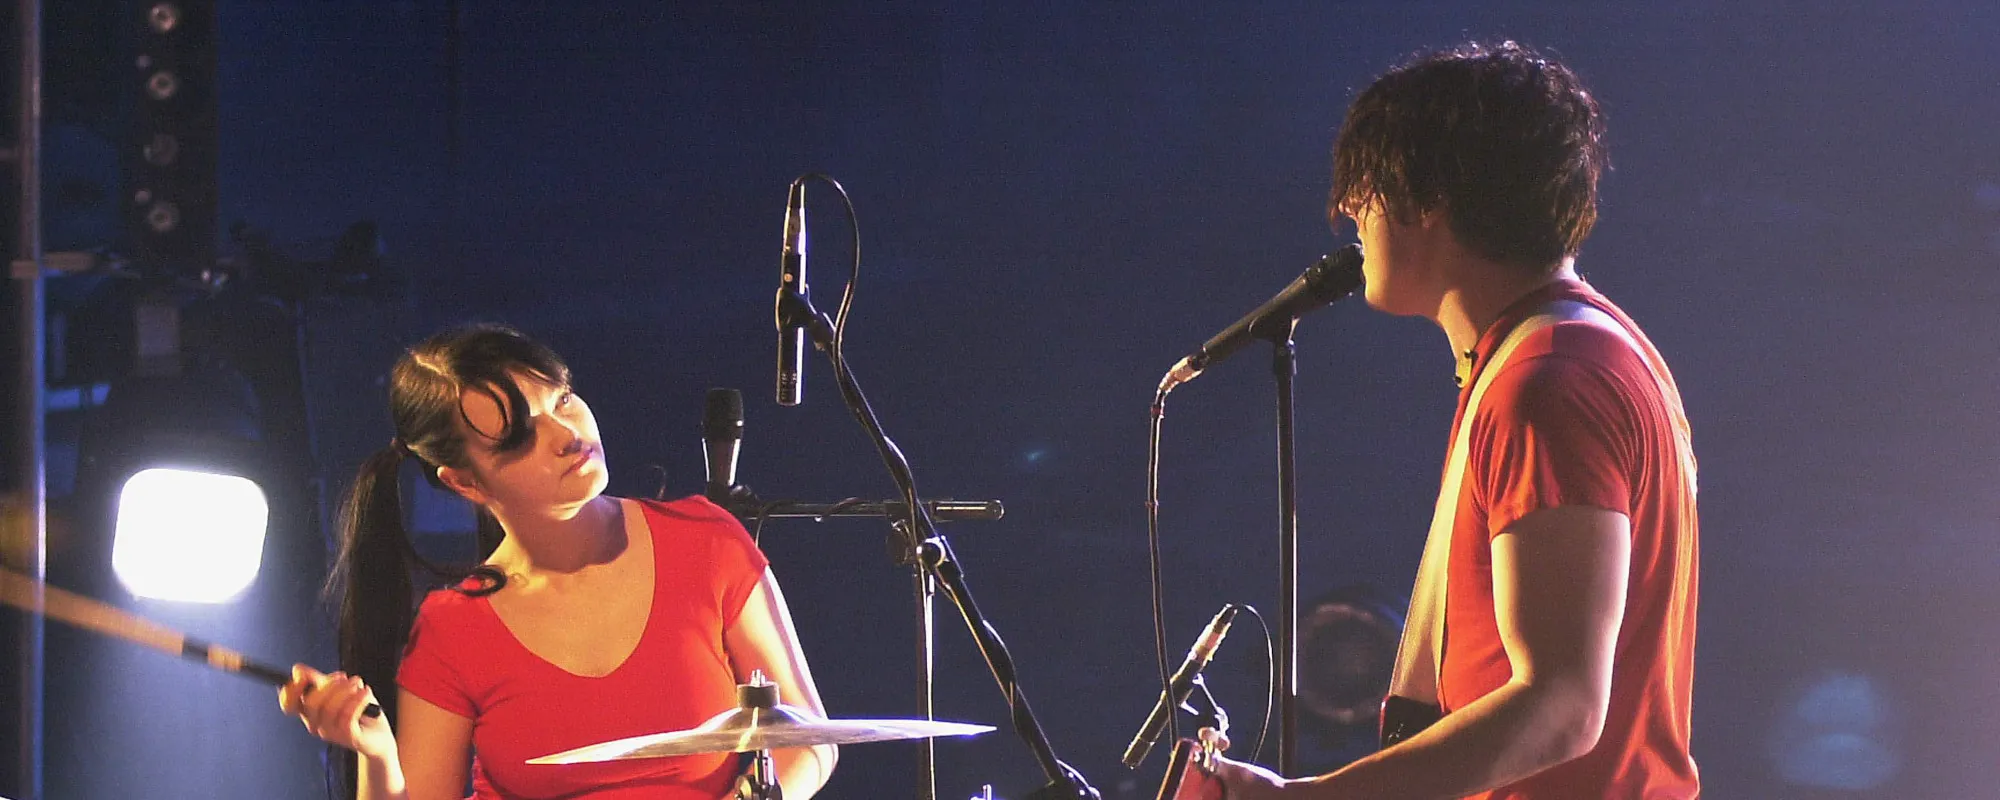 The 12 Songs That Define The White Stripes’ Career